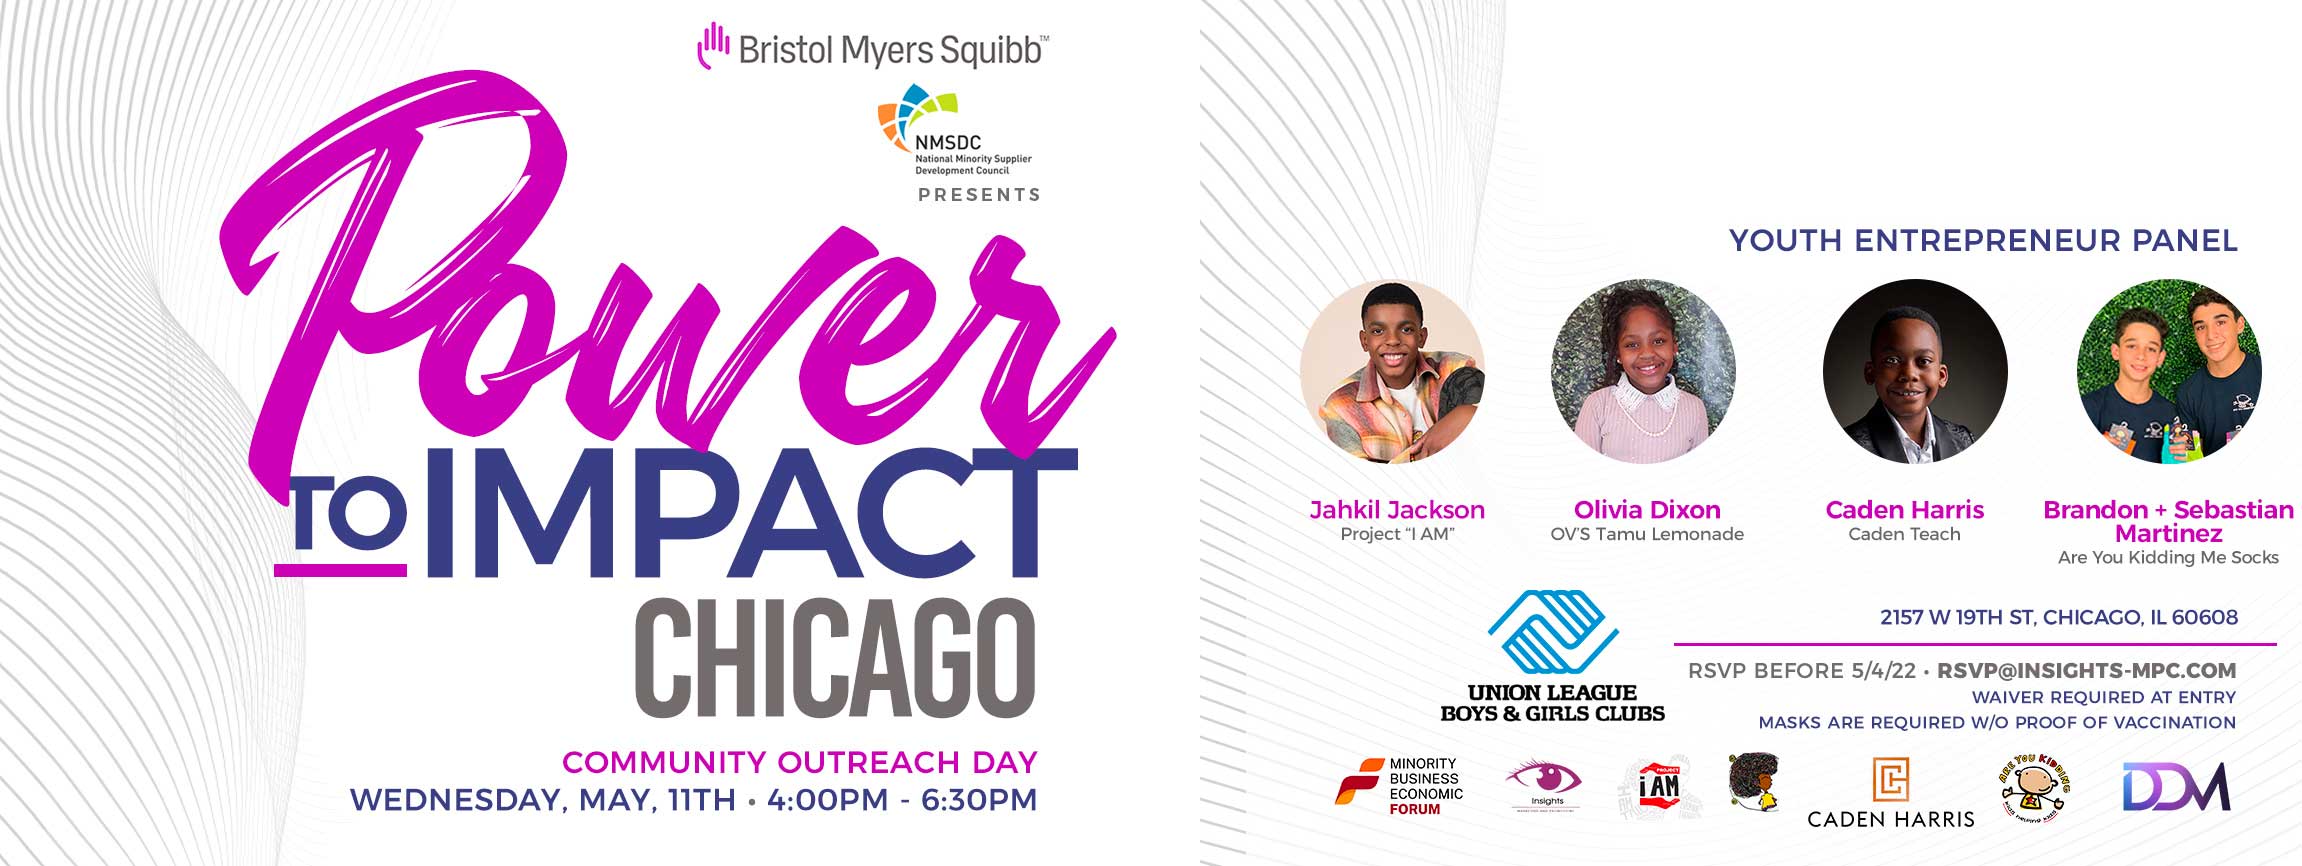 NMSDC Announces “Power to Impact: Real Talks” Community Outreach Event Ahead of its Inaugural Minority Business Economic Forum